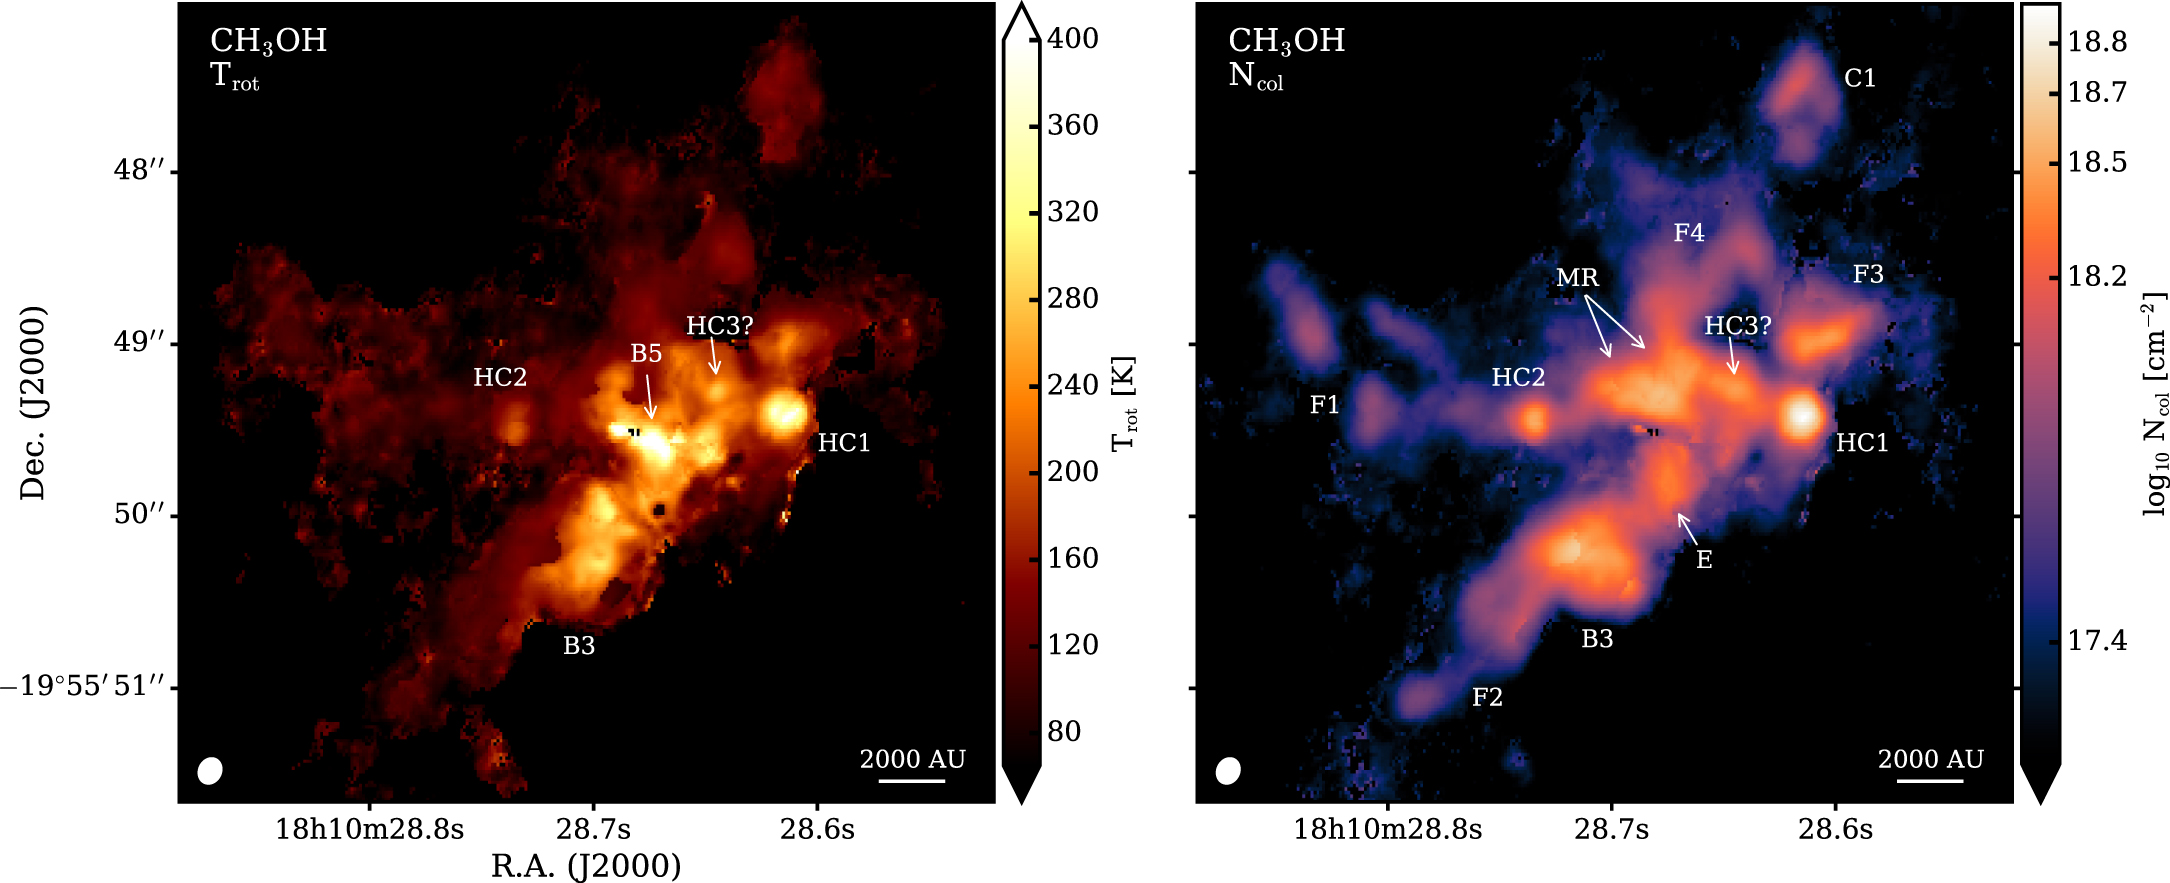 Rotational temperature and column density maps of the high-mass star-forming region G10.6-0.4, which illustrate its complex physical and chemical structure.